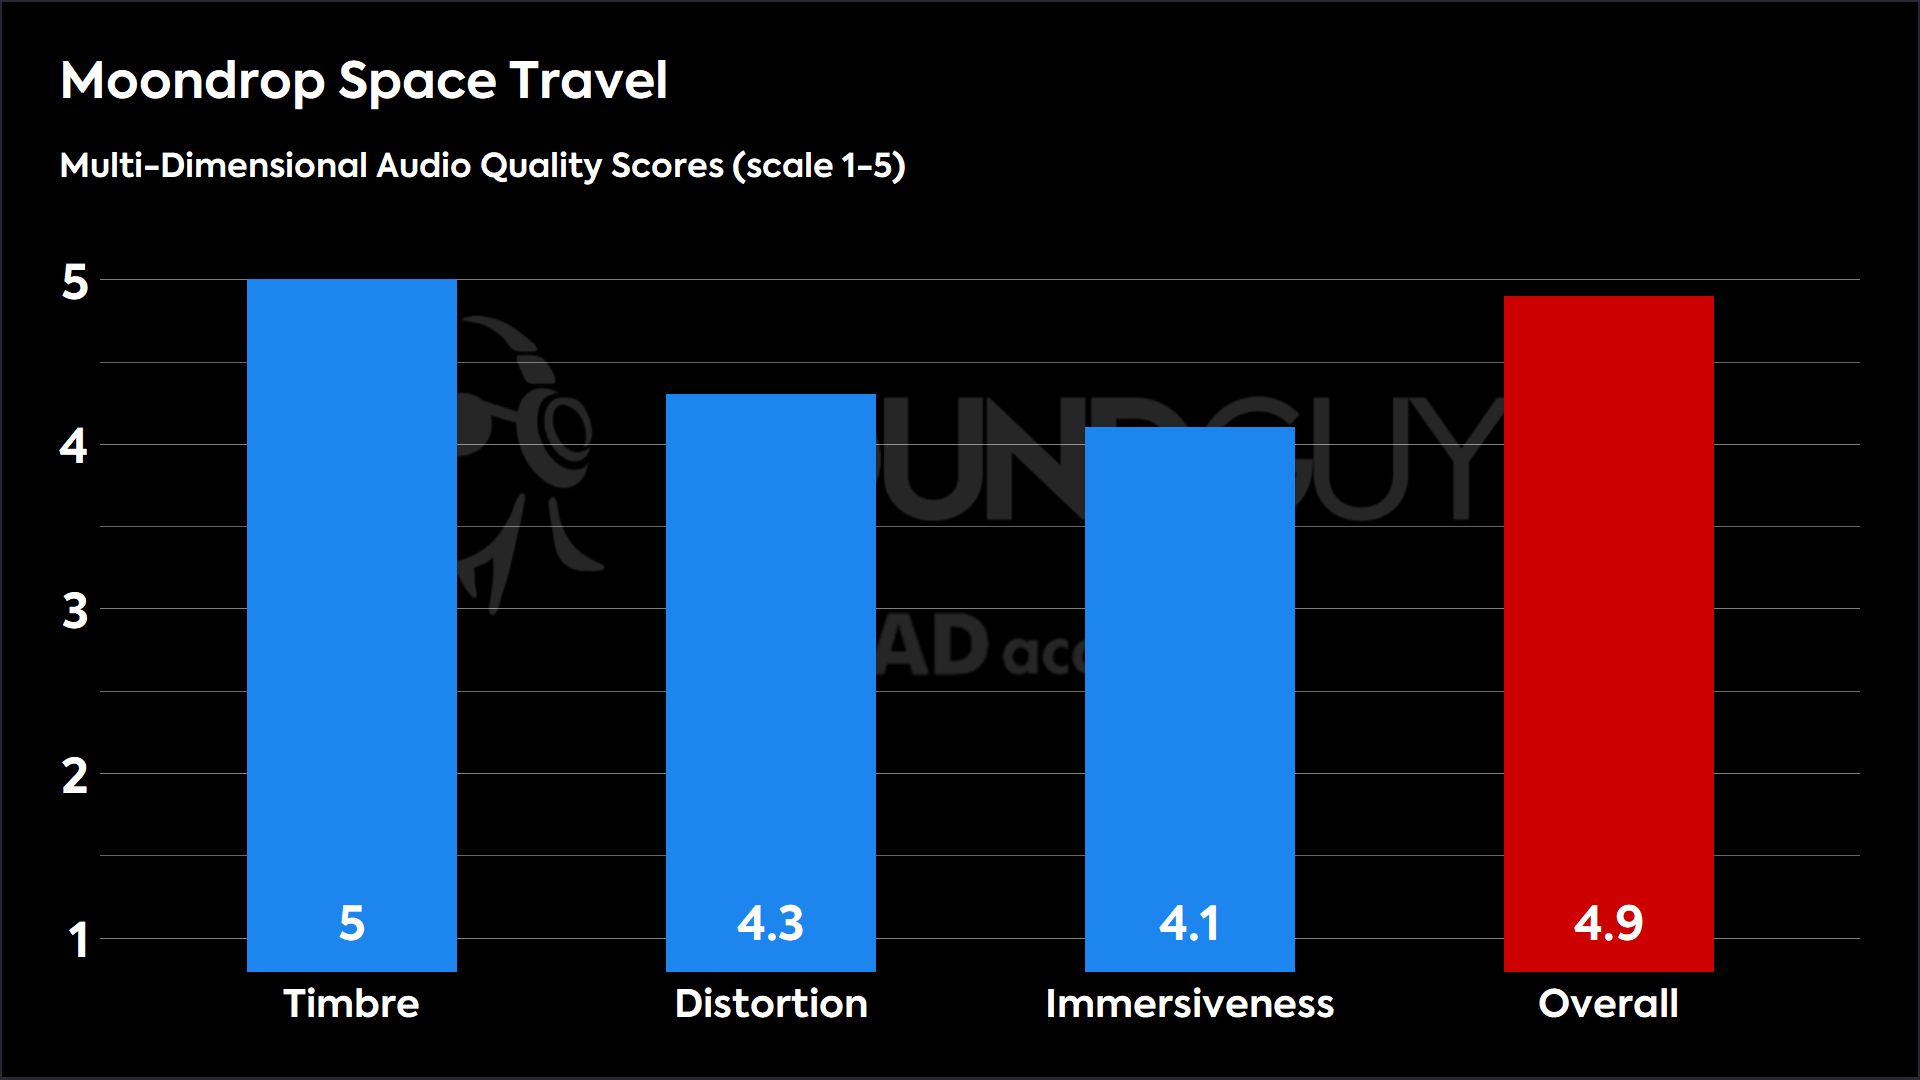 This chart shows the MDAQS results for the Moondrop Space Travel in Default mode. The Timbre score is 5, The Distortion score is 4.3, the Immersiveness score is 4.1, and the Overall Score is 4.9).